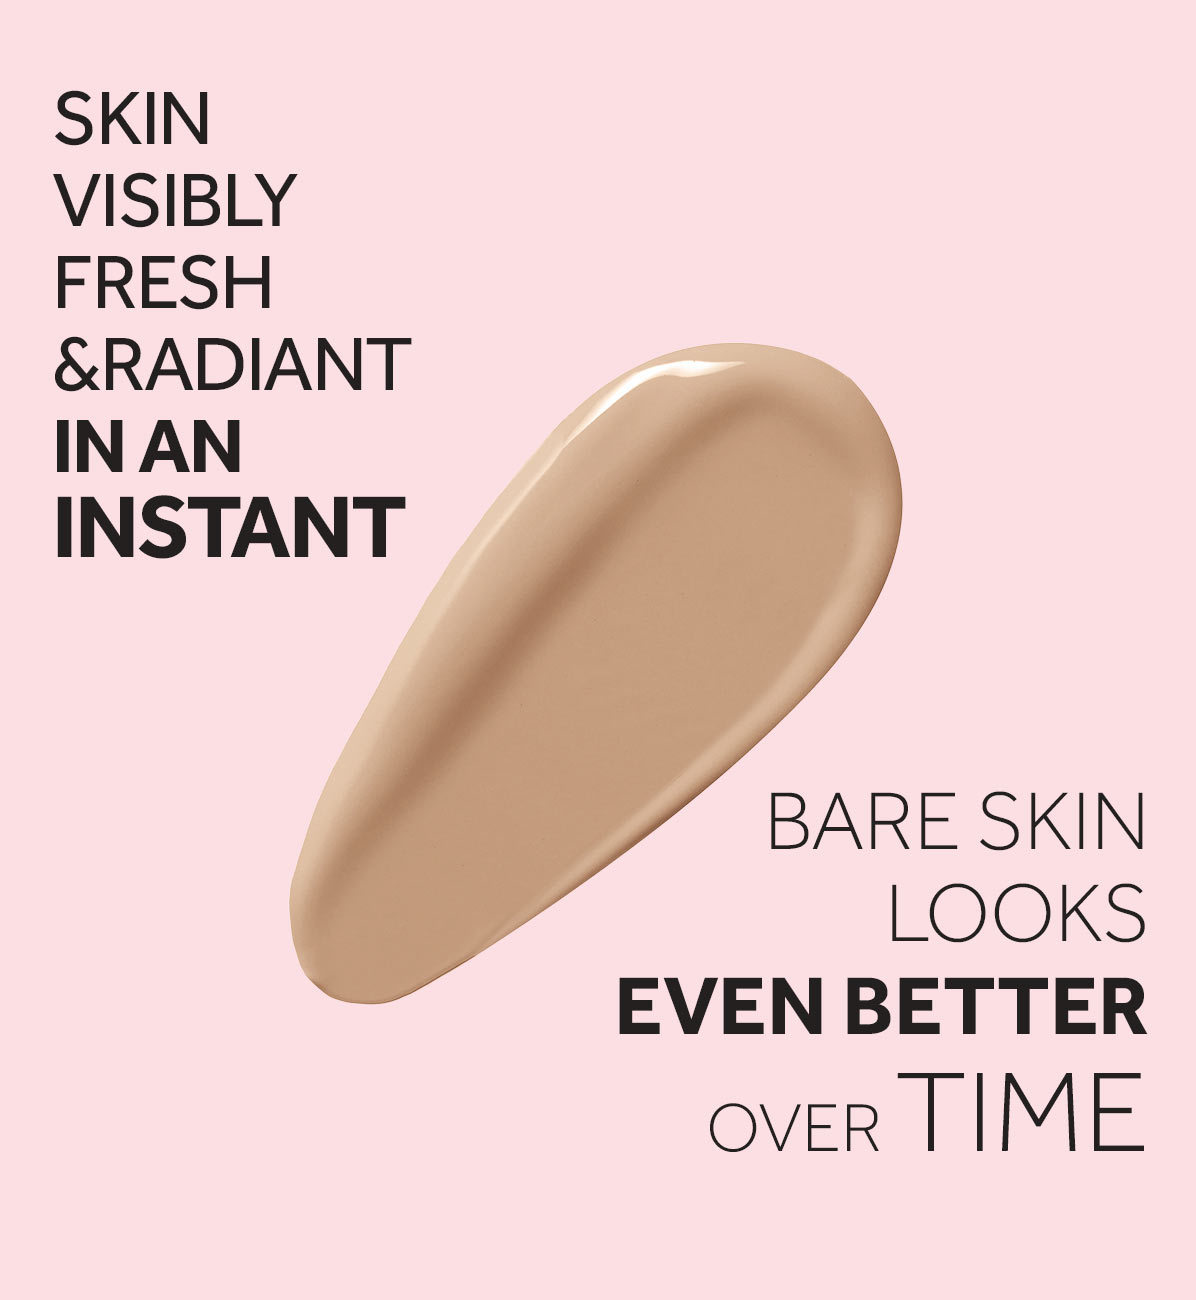 SKIN VISIBLY FRESH & RADIANT IN AN INSTANT BARE SKIN LOOKS EVEN BETTEROVER TIME